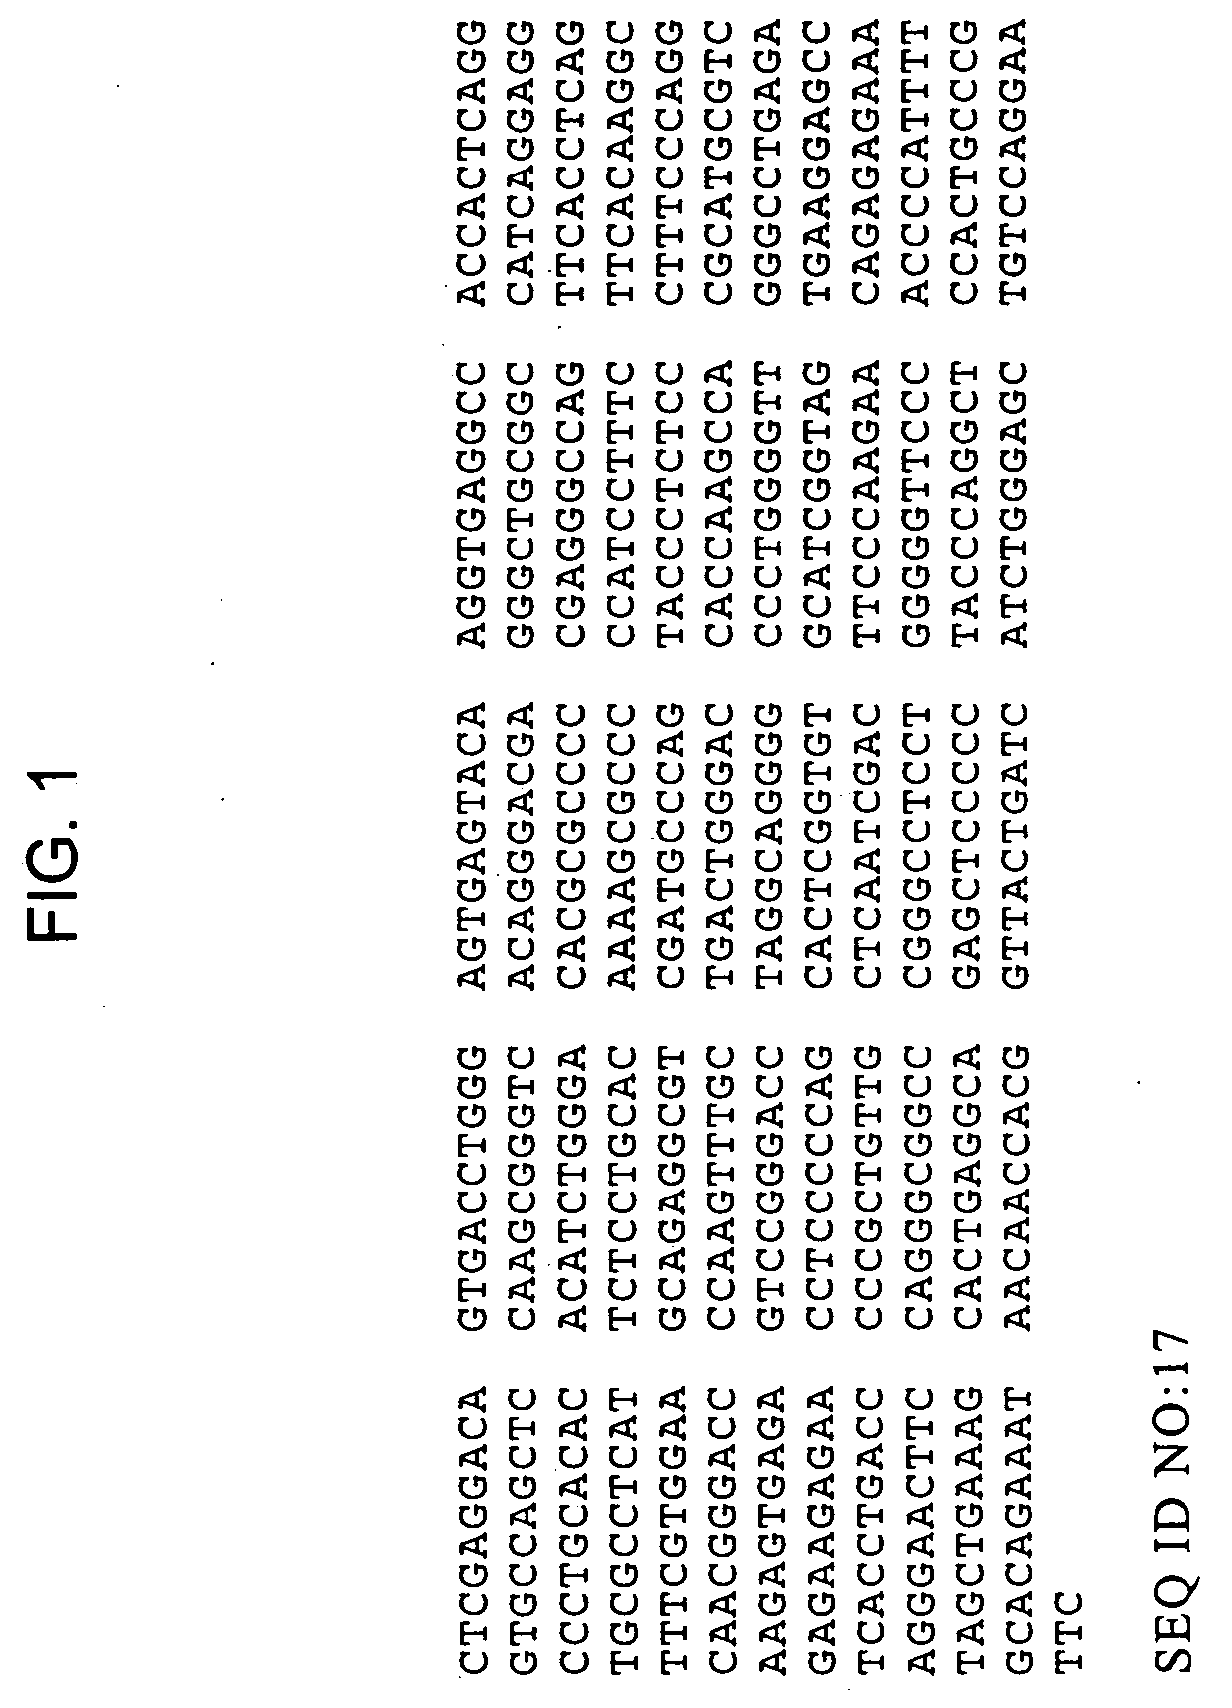 Methods of identifying compounds that modulate IL-4 receptor mediated IgE synthesis utilizing a CLLD8 protein